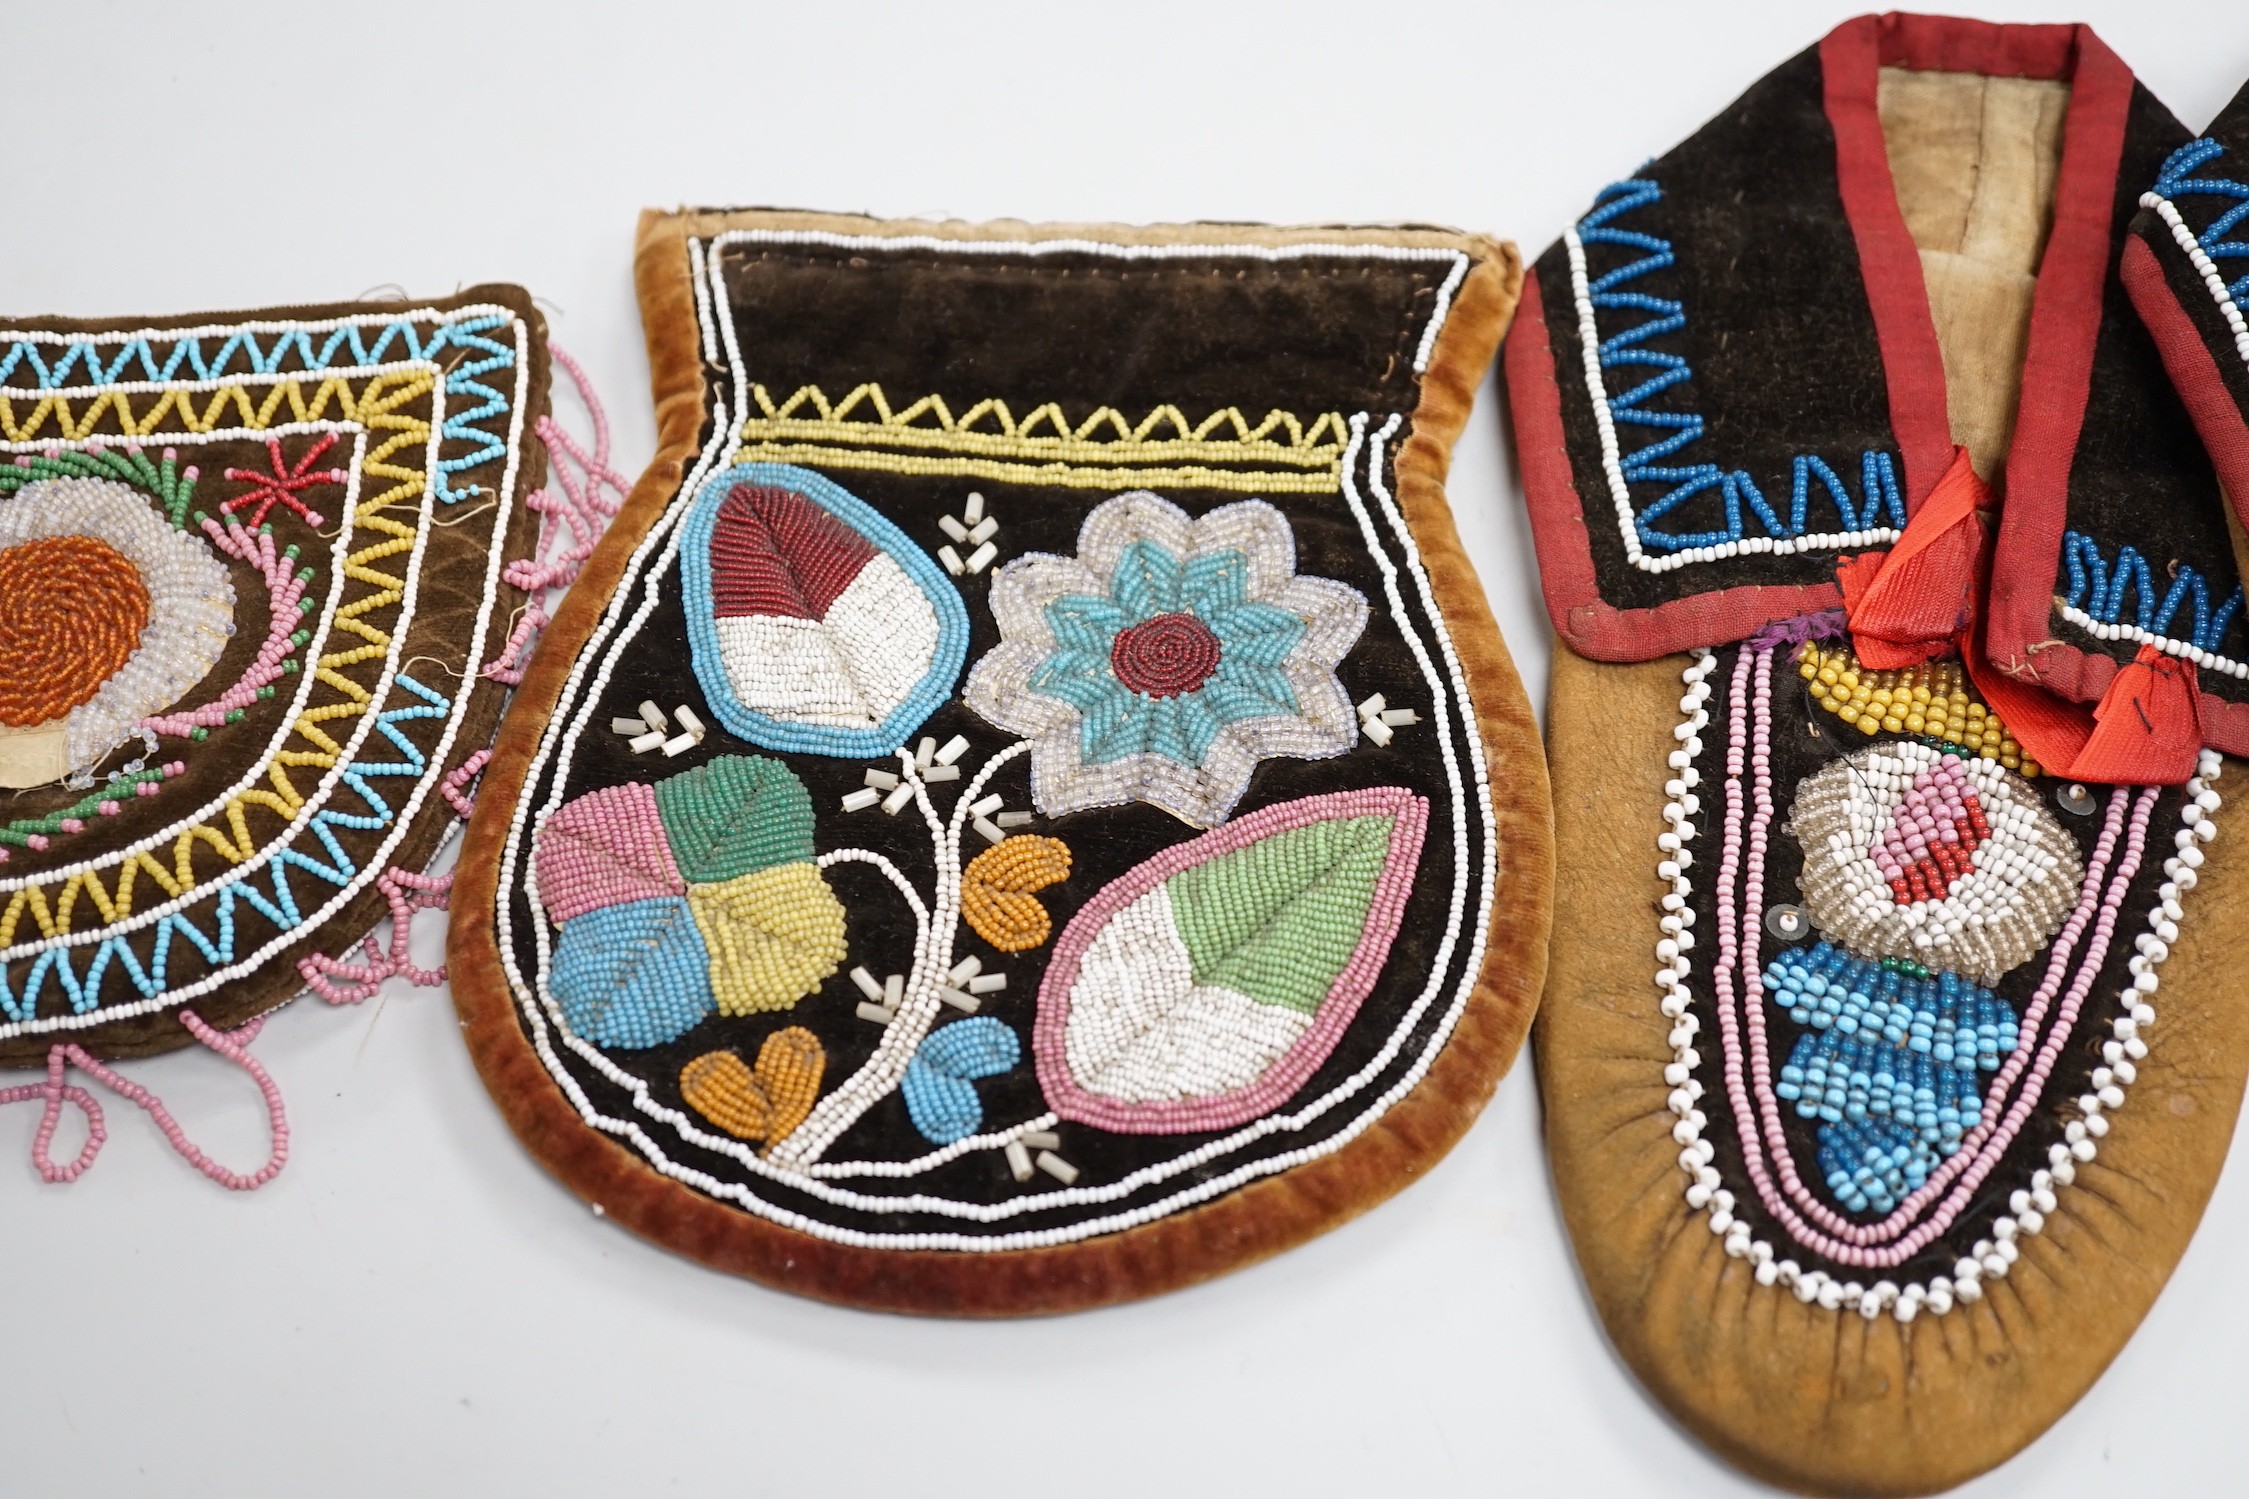 A pair of mid to late 19th century Mikmaq, North American Indian, moccasins, worked in floral - Image 3 of 5